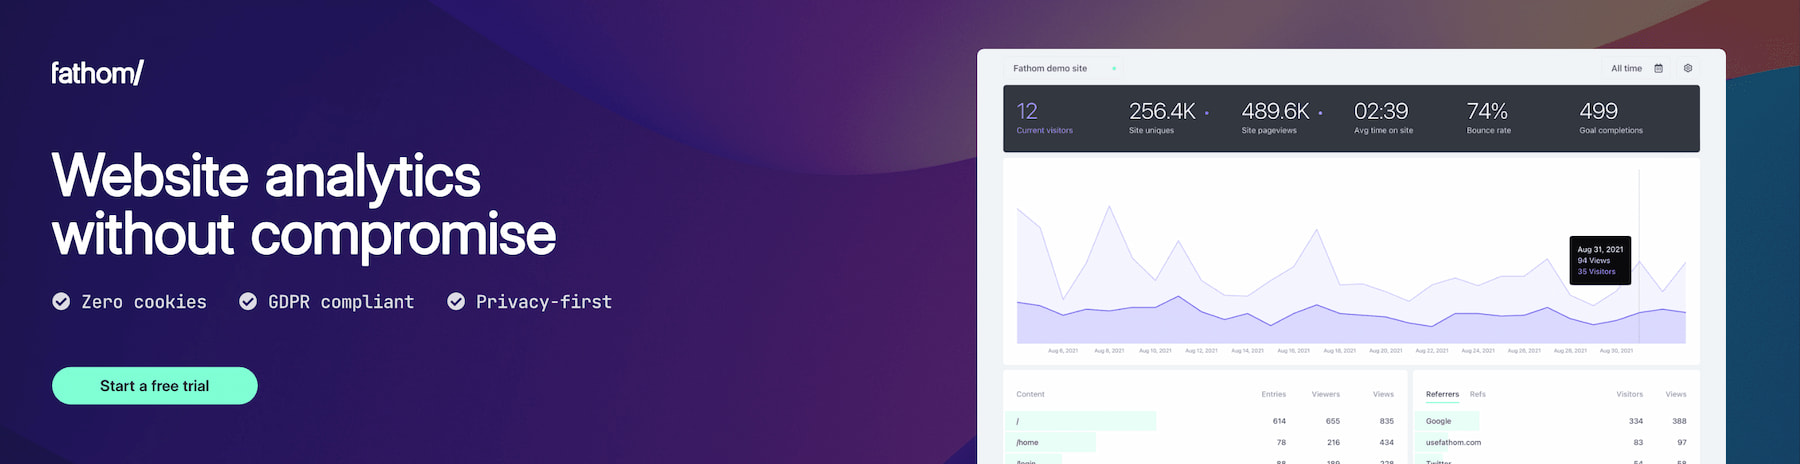 Affiliate recommendation: Fathom, website analytics without compromise